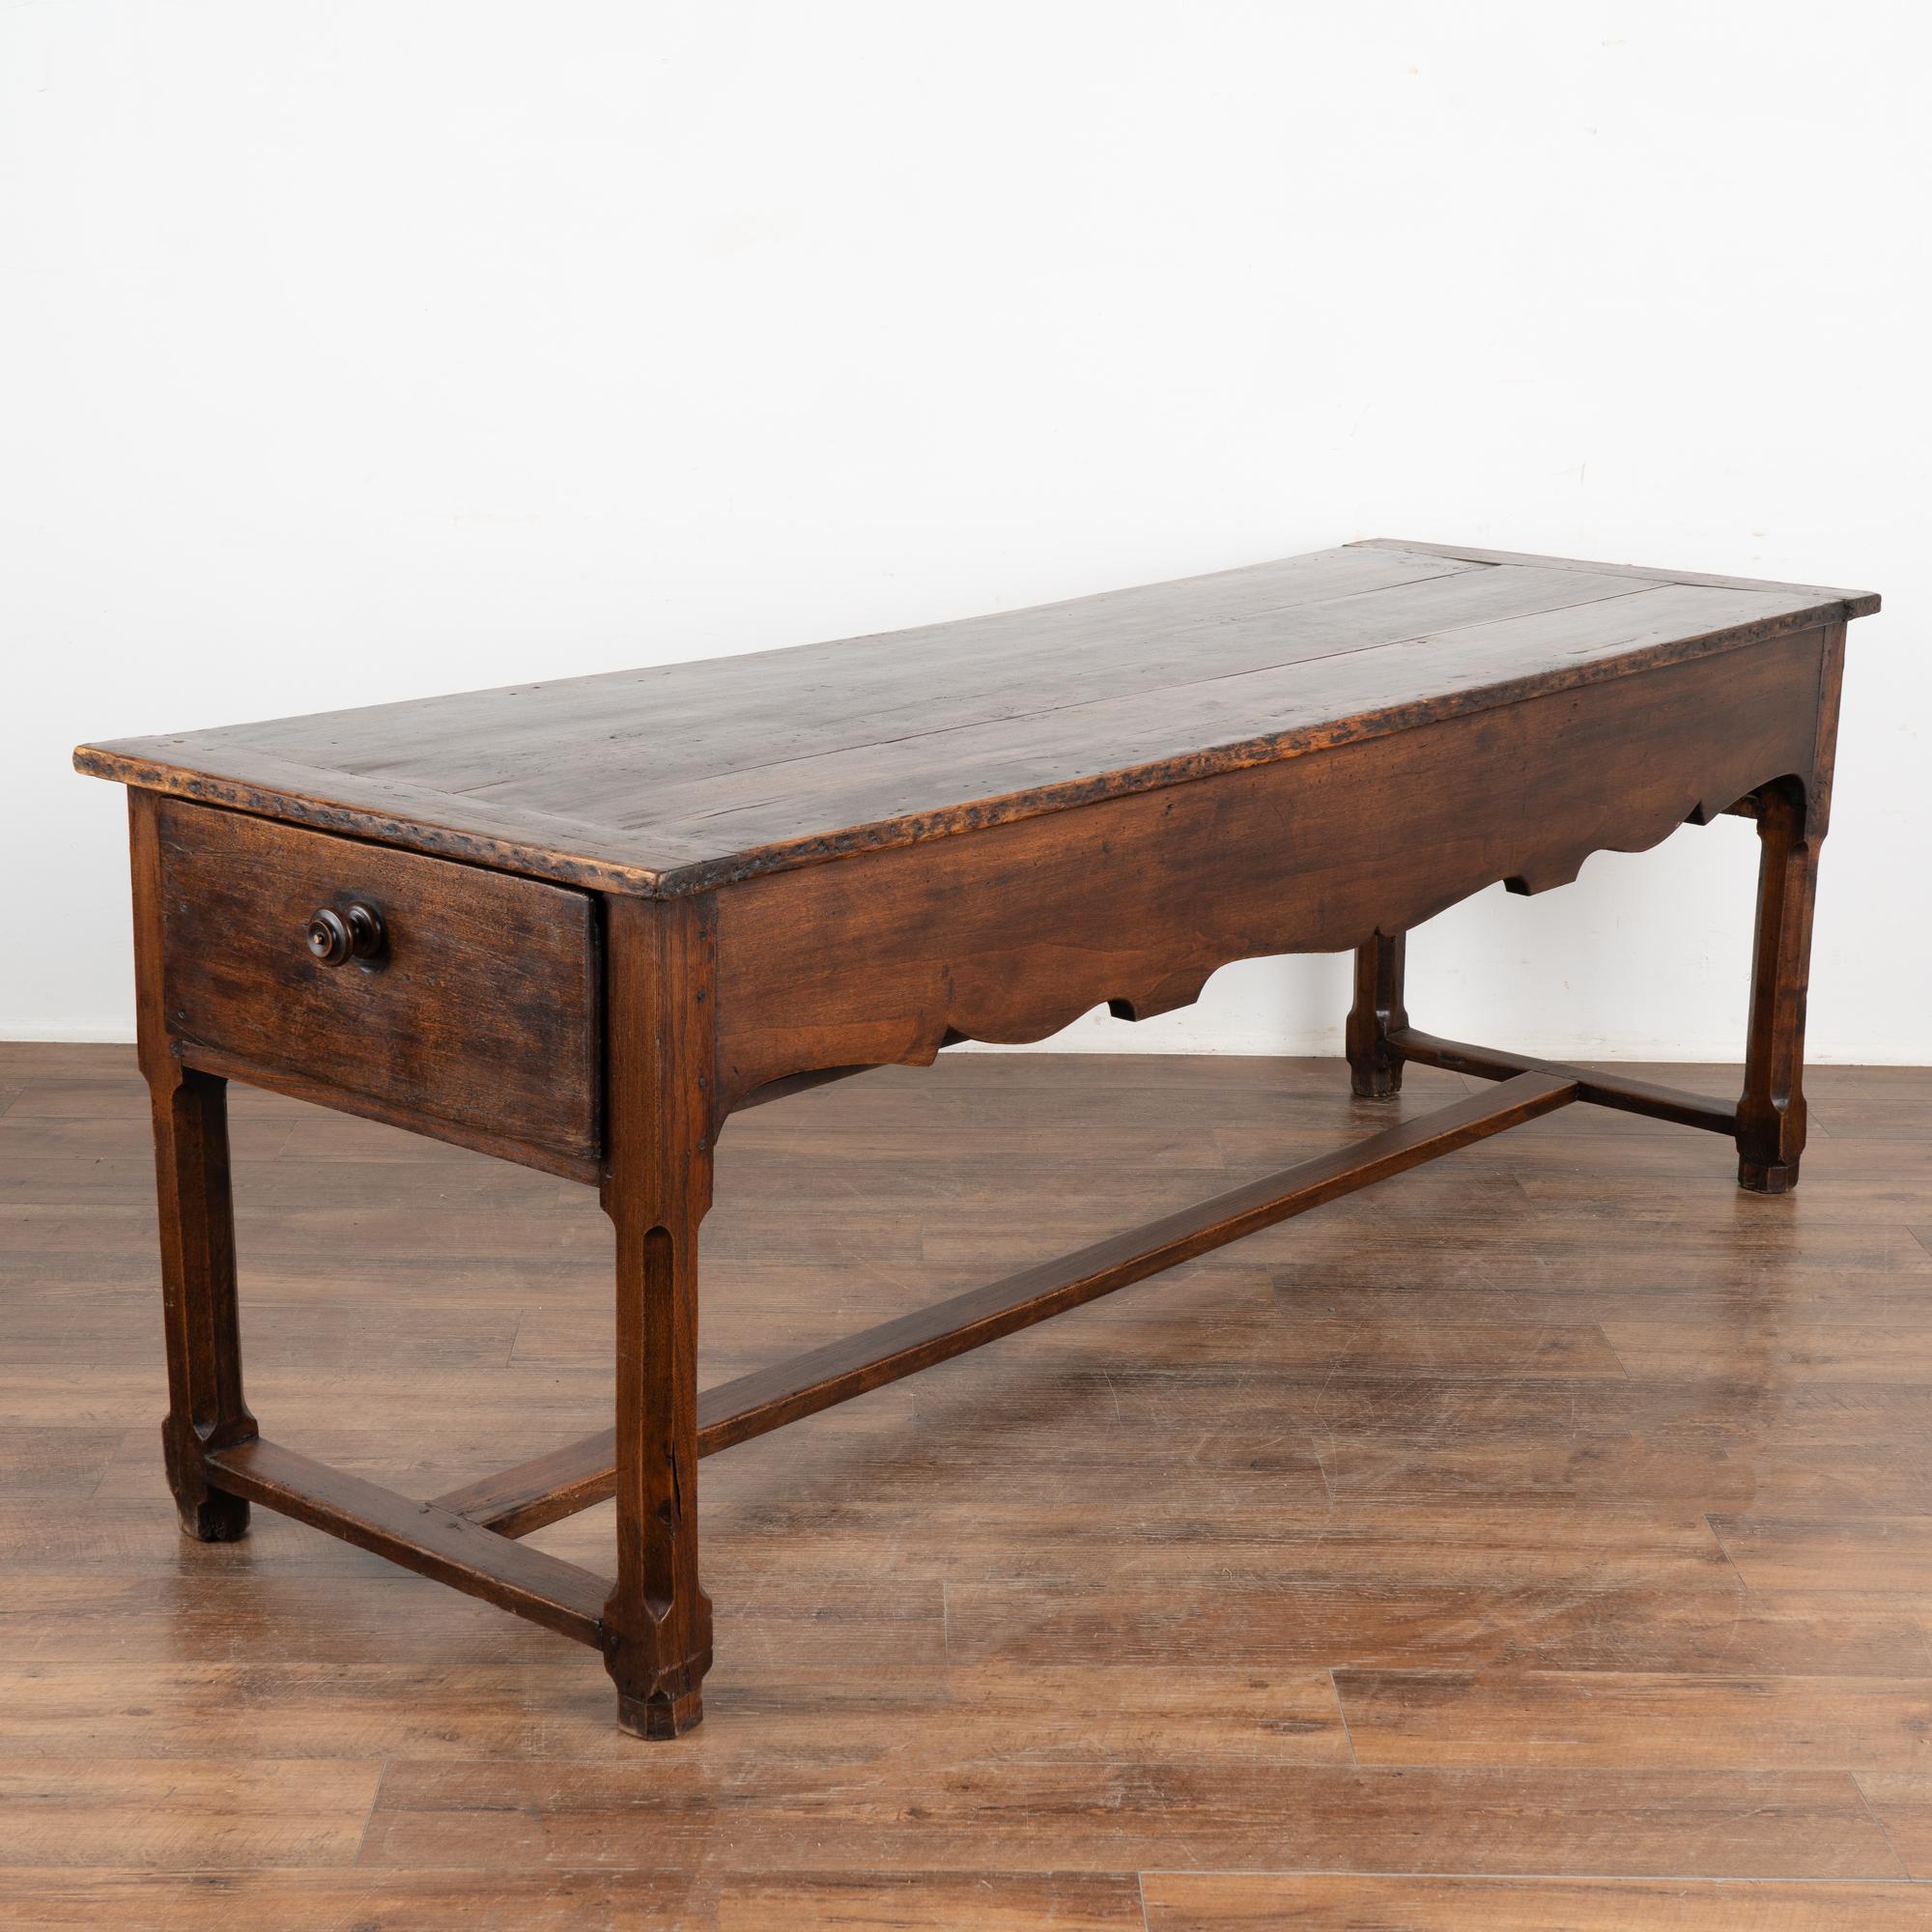 Antique French Console Table With Drawers, circa 1800-40 6